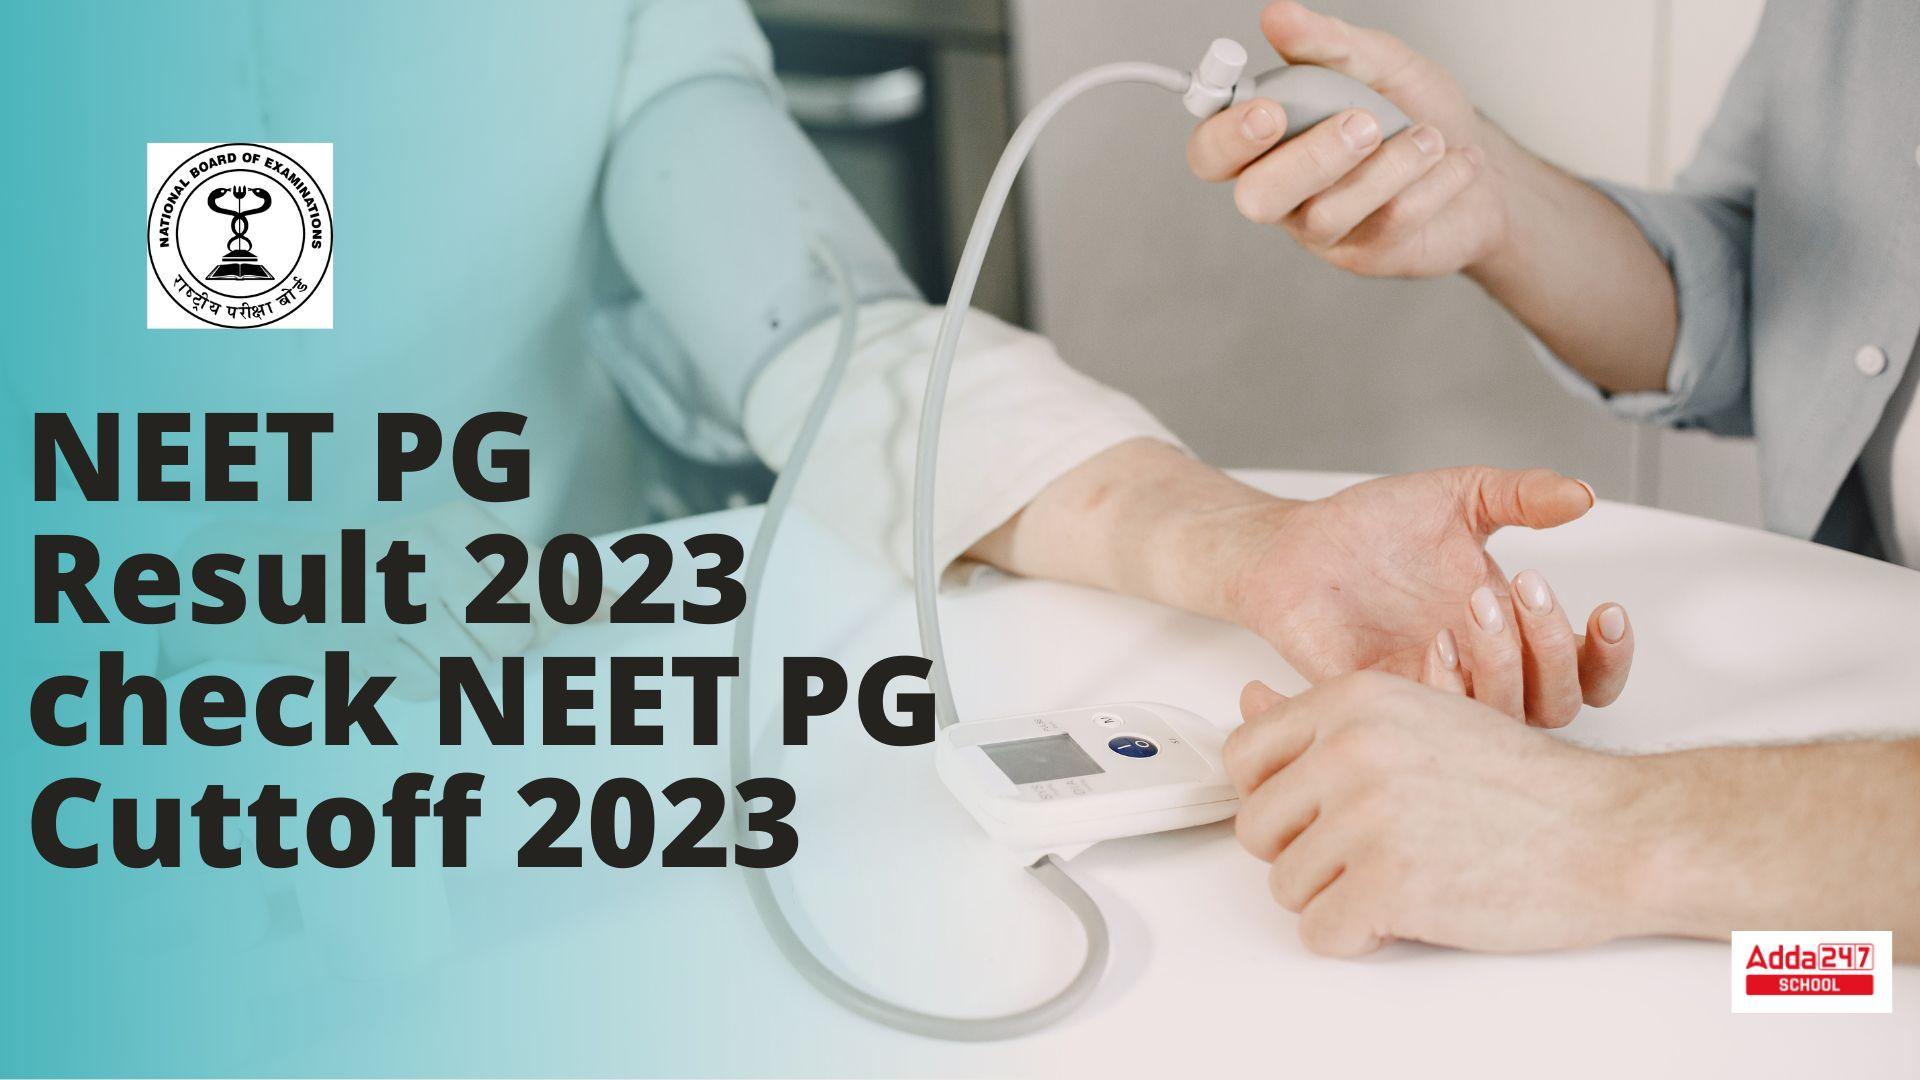 NEET PG Cut off 2023, Branchwise Marks for OBC, SC, ST, General_30.1